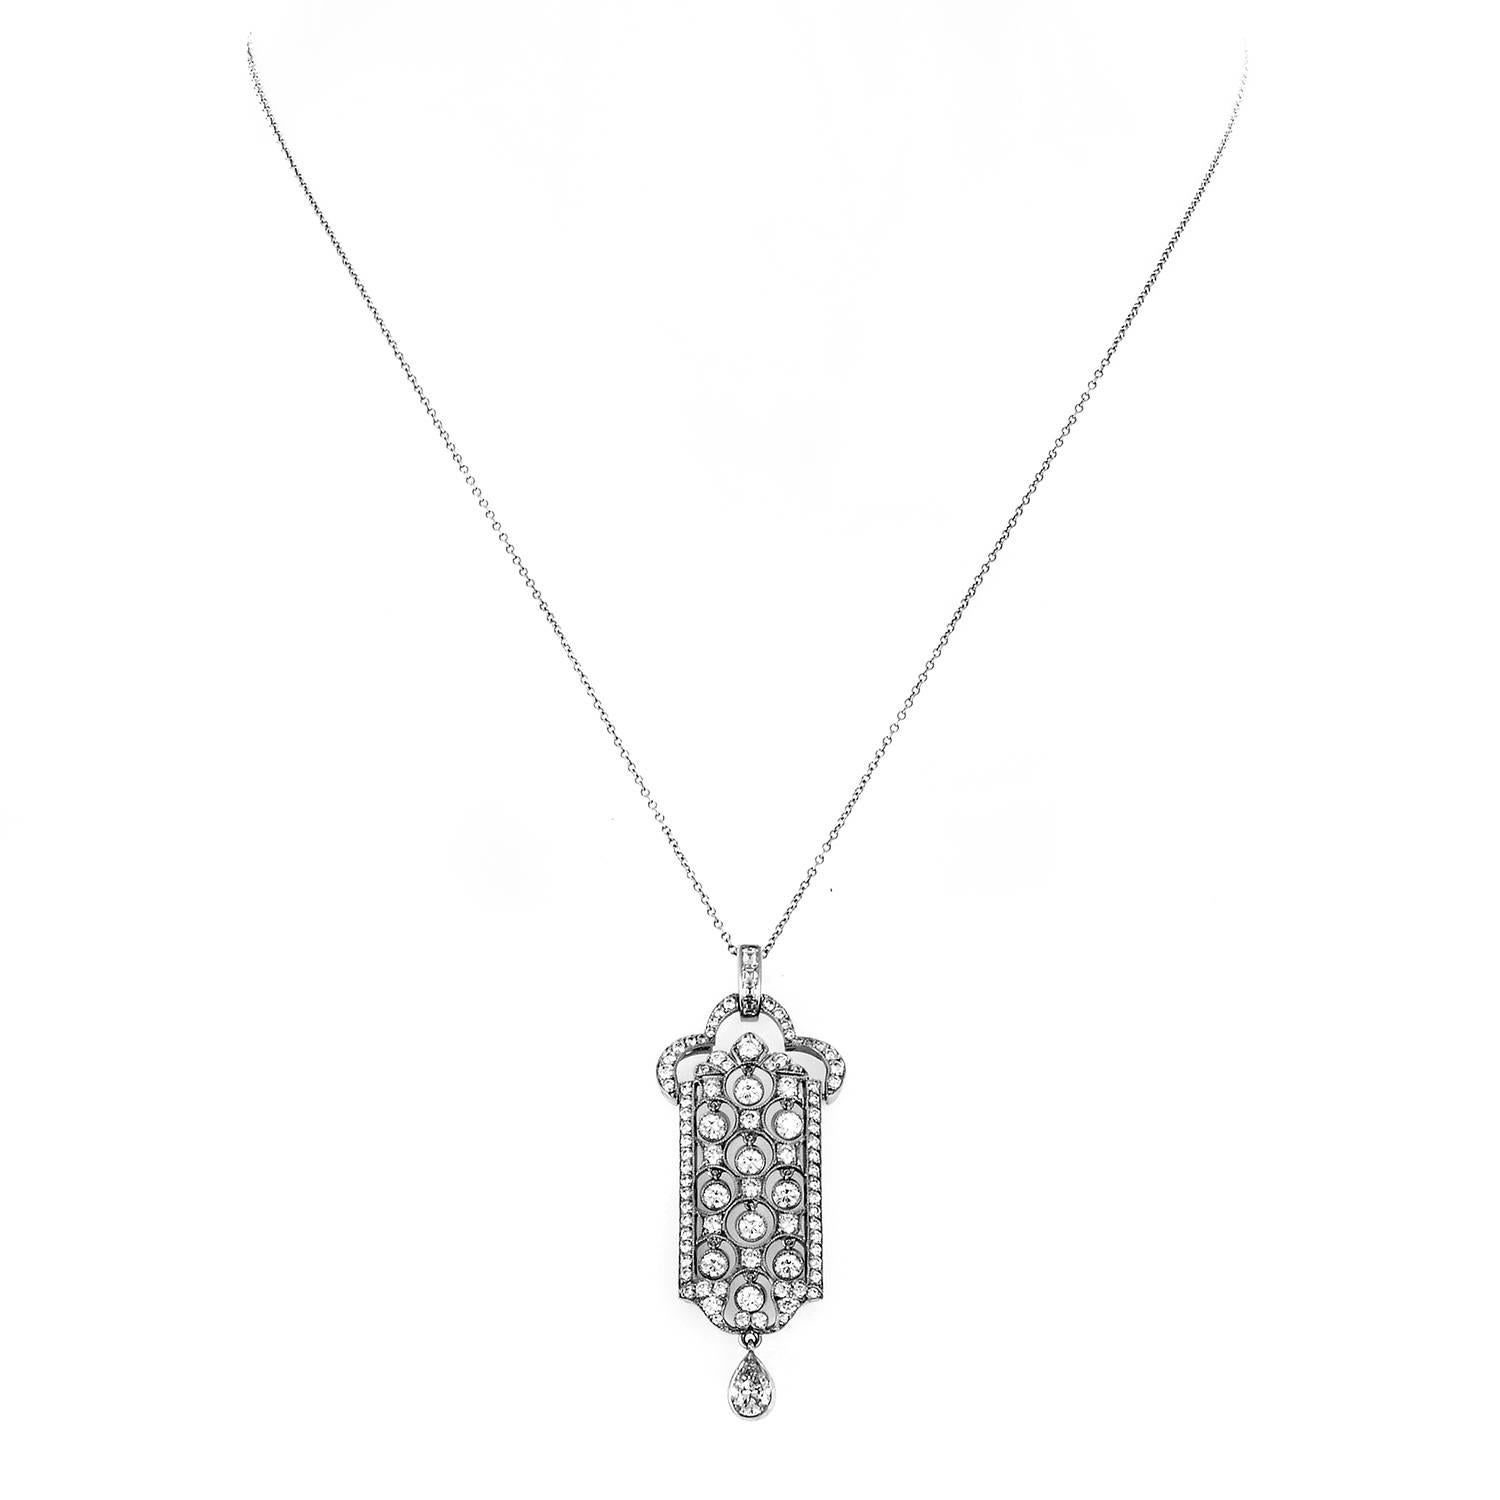 Harmoniously complementing materials of immense prestigious appeal blend together tastefully in the pendant of this glorious necklace from Tiffany & Co. as shimmering platinum is adorned with sparkling diamonds totaling approximately 2.40